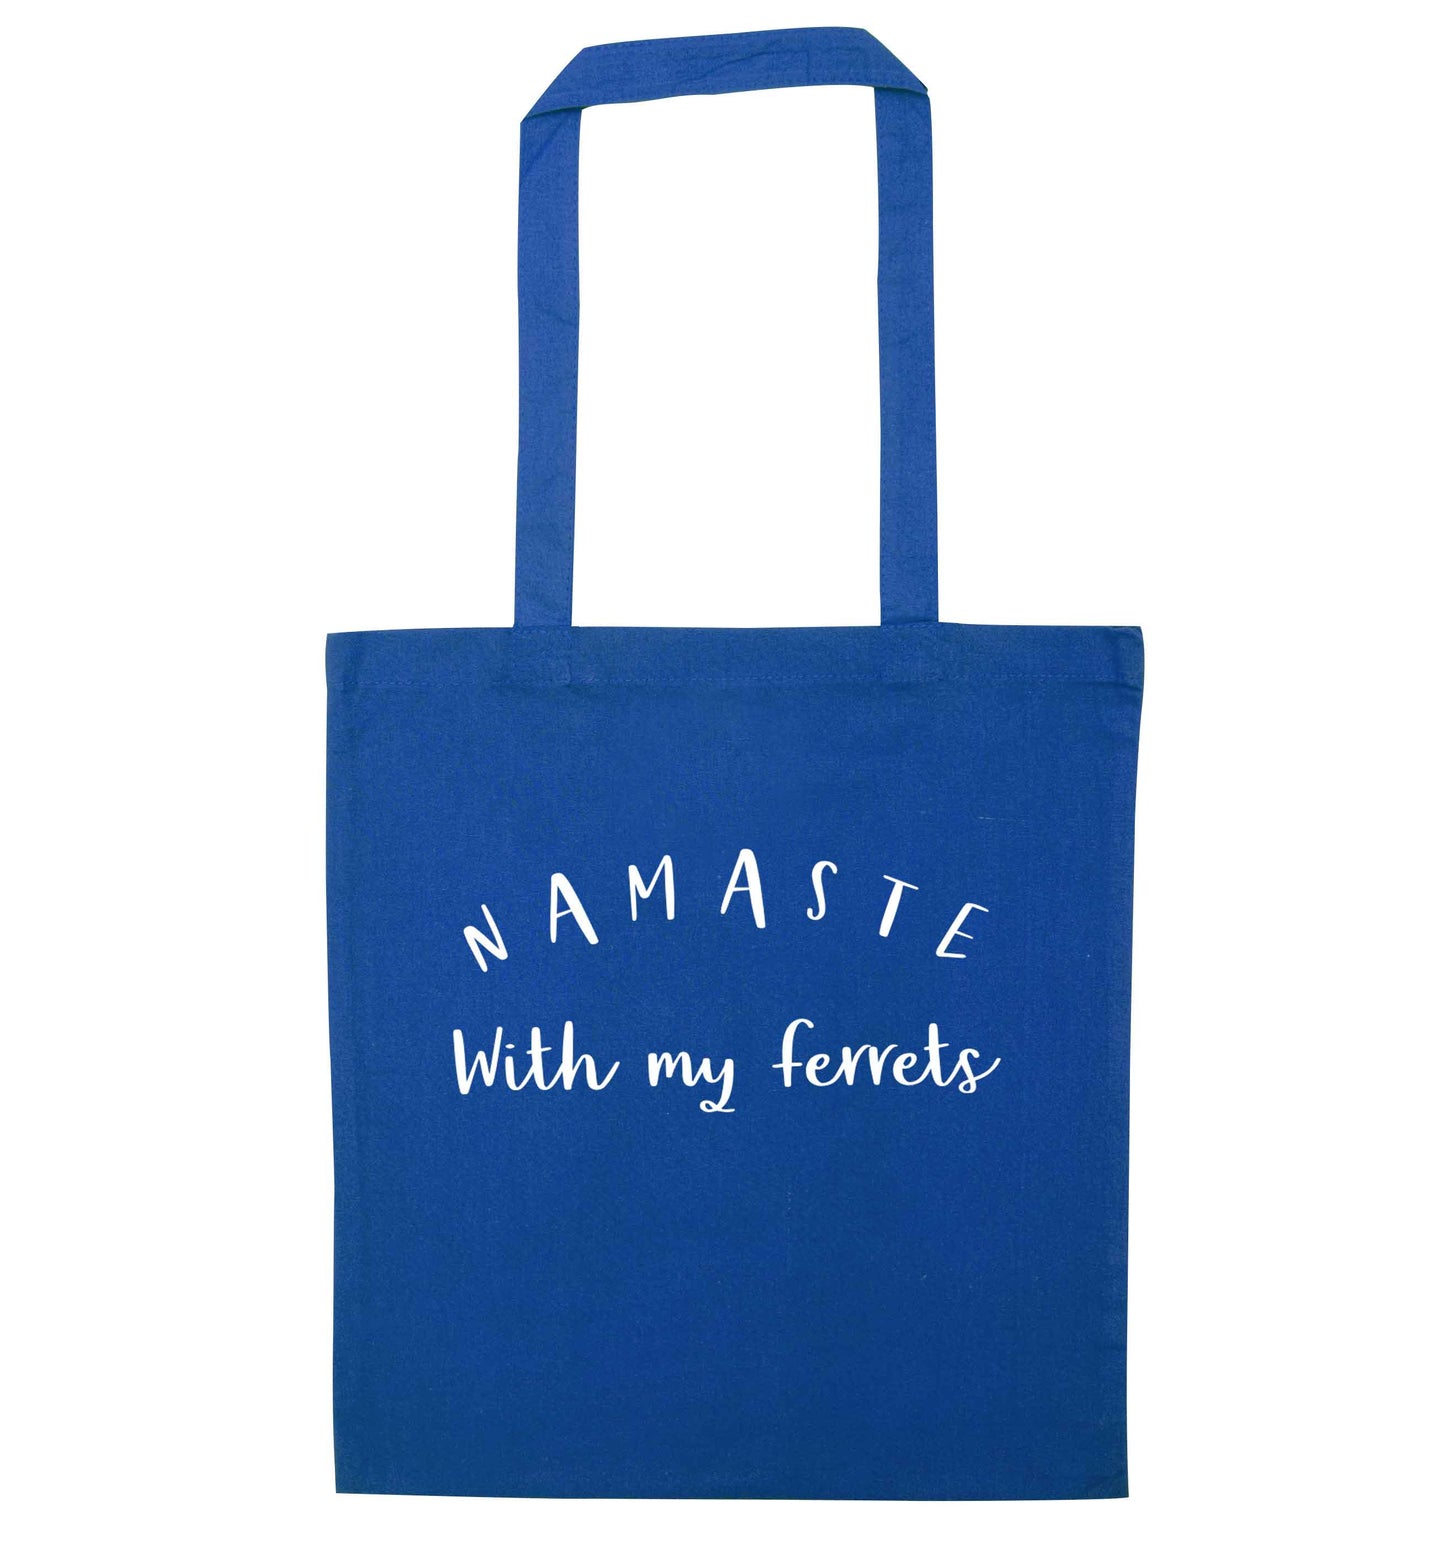 Namaste with my ferrets blue tote bag